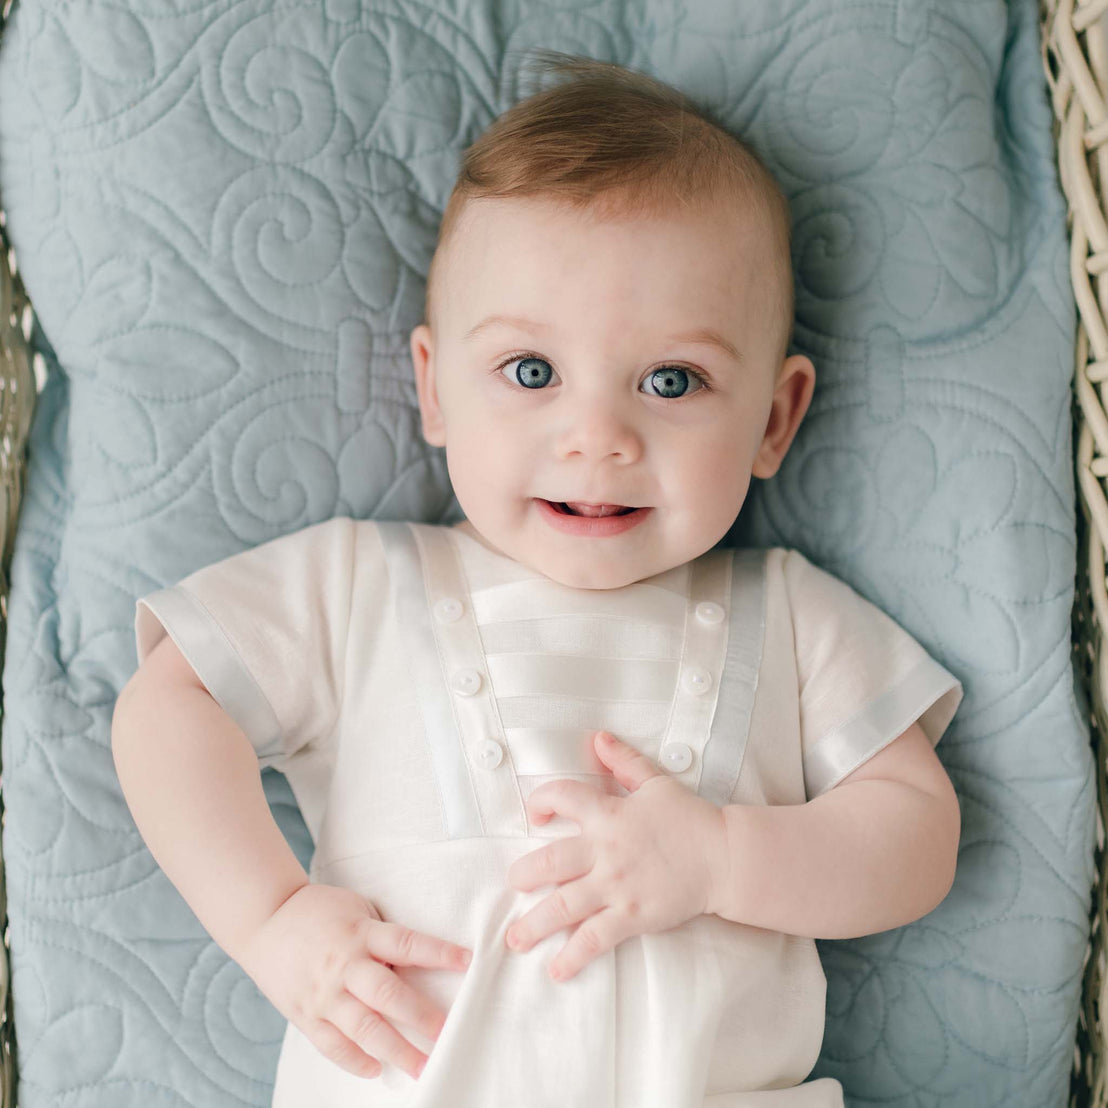 A smiling baby with bright blue eyes lies on a quilted blue blanket, dressed in the Owen Linen Romper, looking directly at the camera. The romper features silk ribbon in ivory and light blue across the front bodice and sleeves.